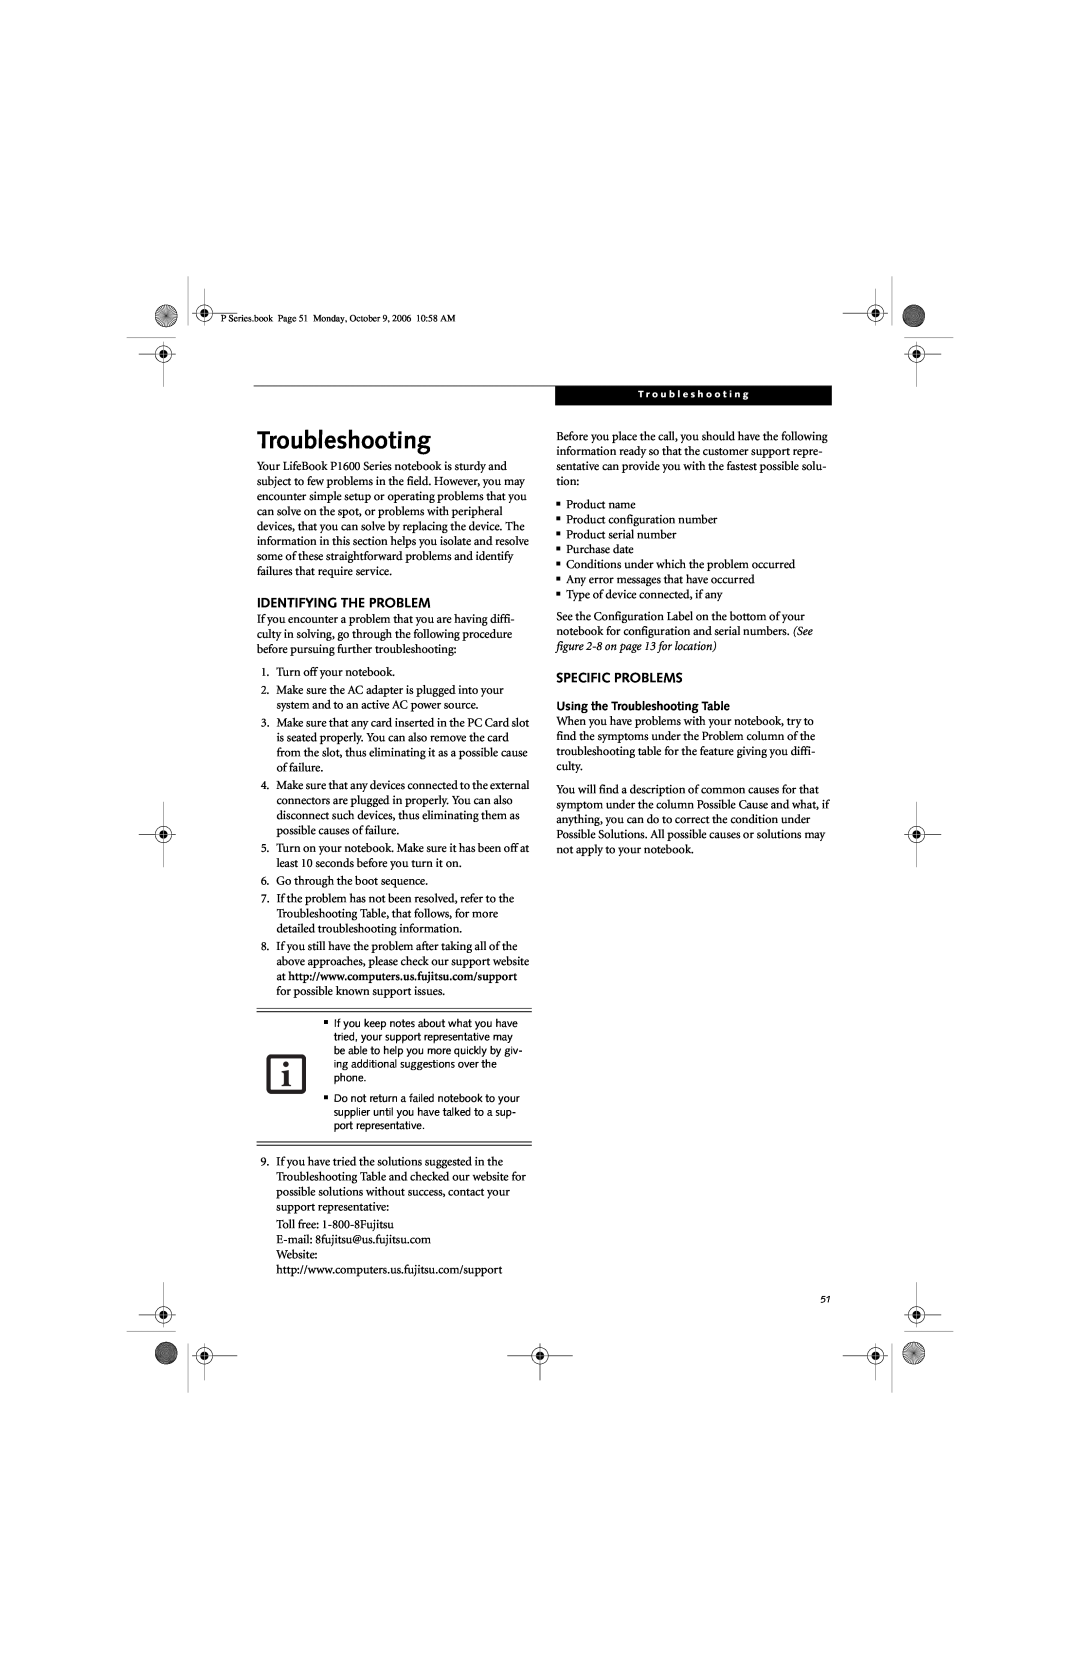 Fujitsu P1610 manual Identifying The Problem, Specific Problems, Using the Troubleshooting Table 